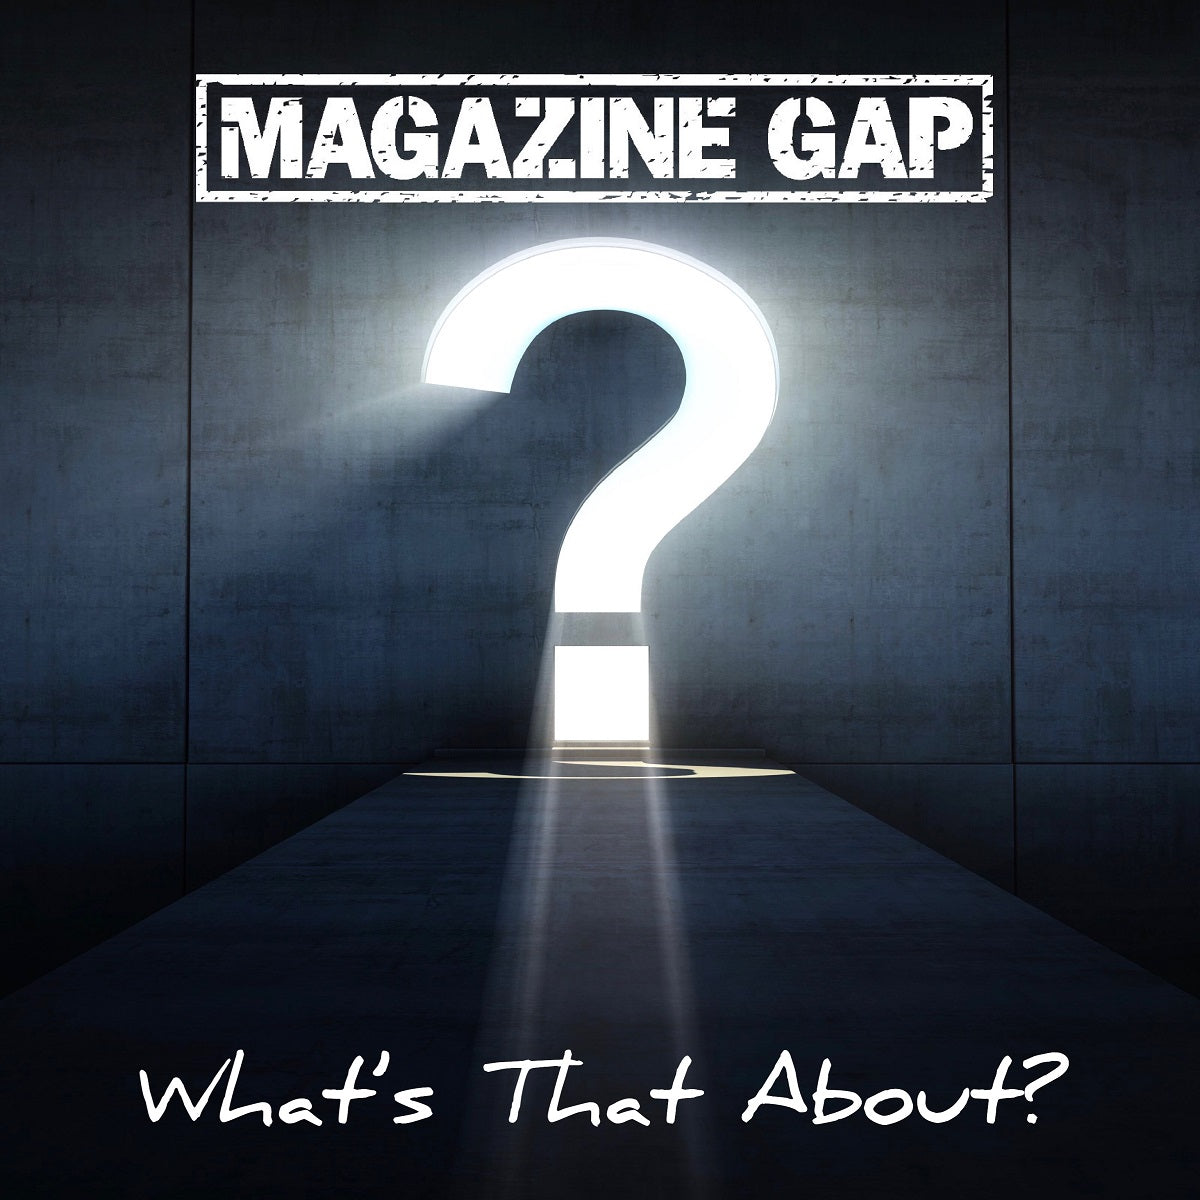 Magazine Gap – ‘What’s That About?’